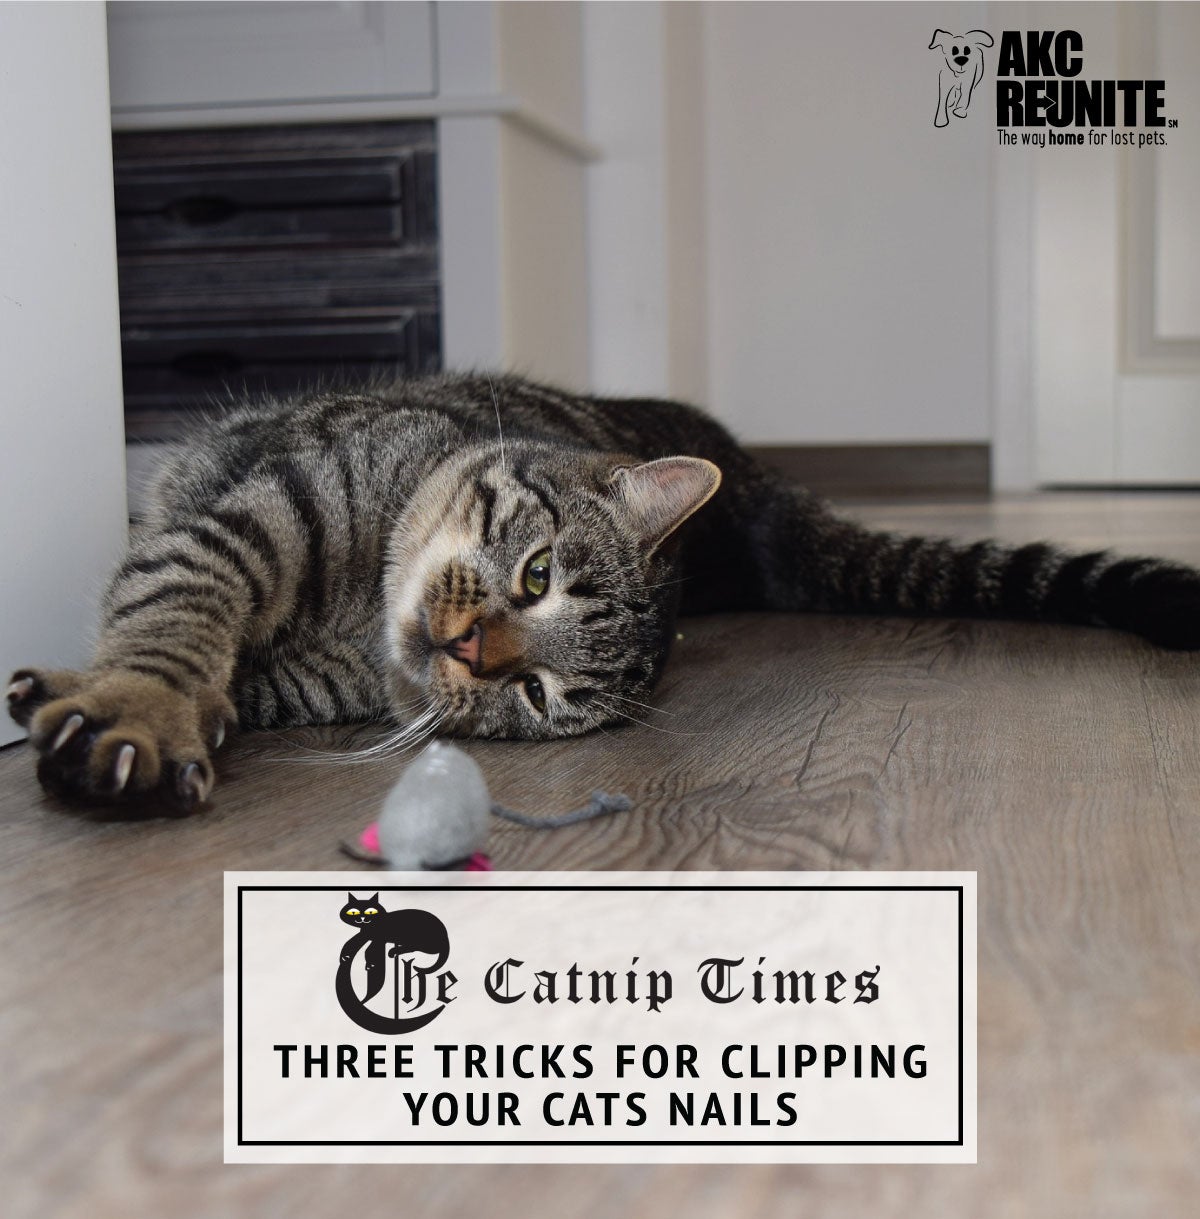 Three Tricks for Clipping Your Cat's Nails | AKC Reunite